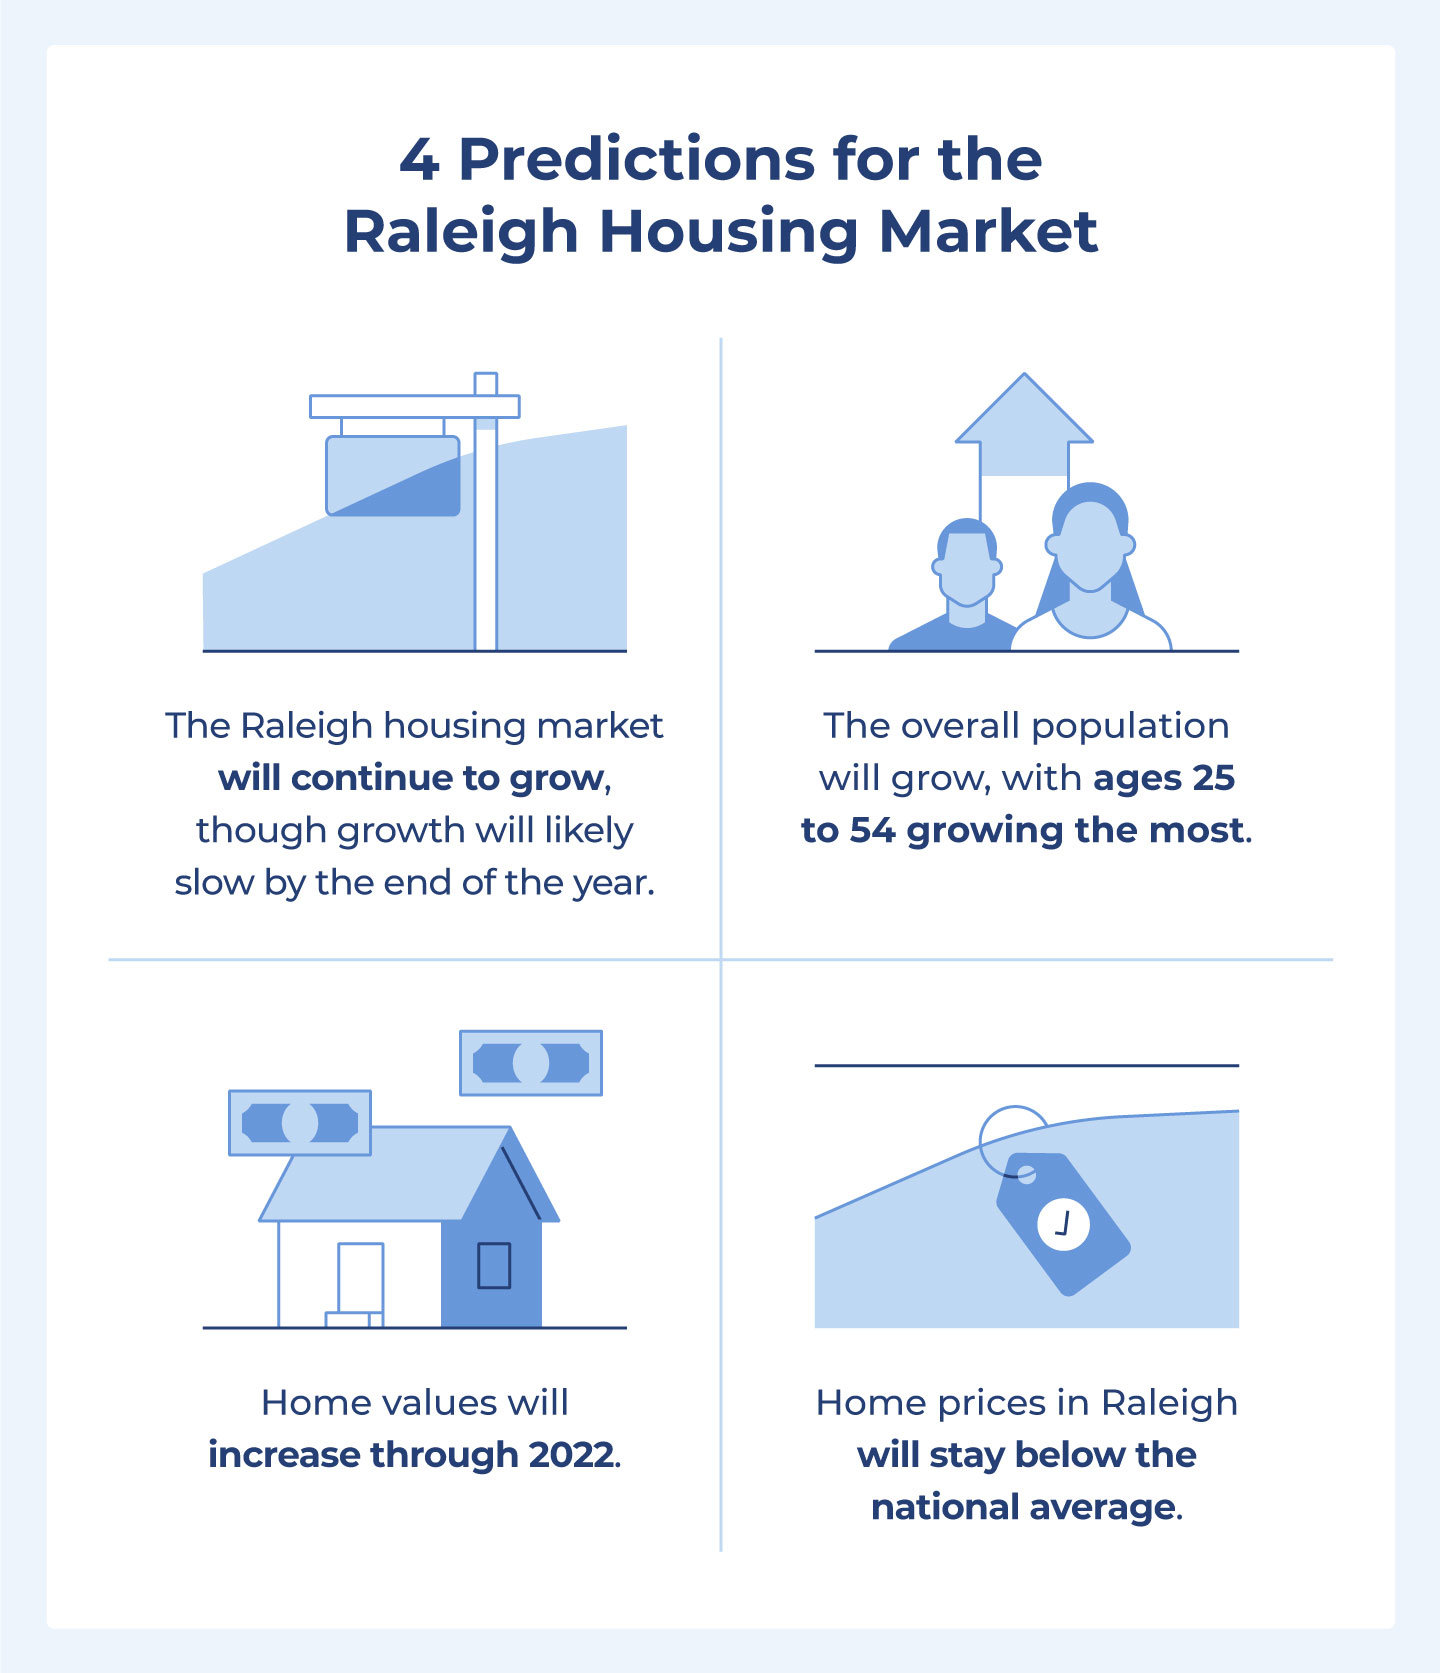 Our predictions for Raleigh’s housing market are that the population will grow, with ages 25 to 54 growing the most; home values will increase through 2022; home prices will stay below the national average; and the Raleigh housing market will continue to grow, though growth will likely taper off by the end of the year.